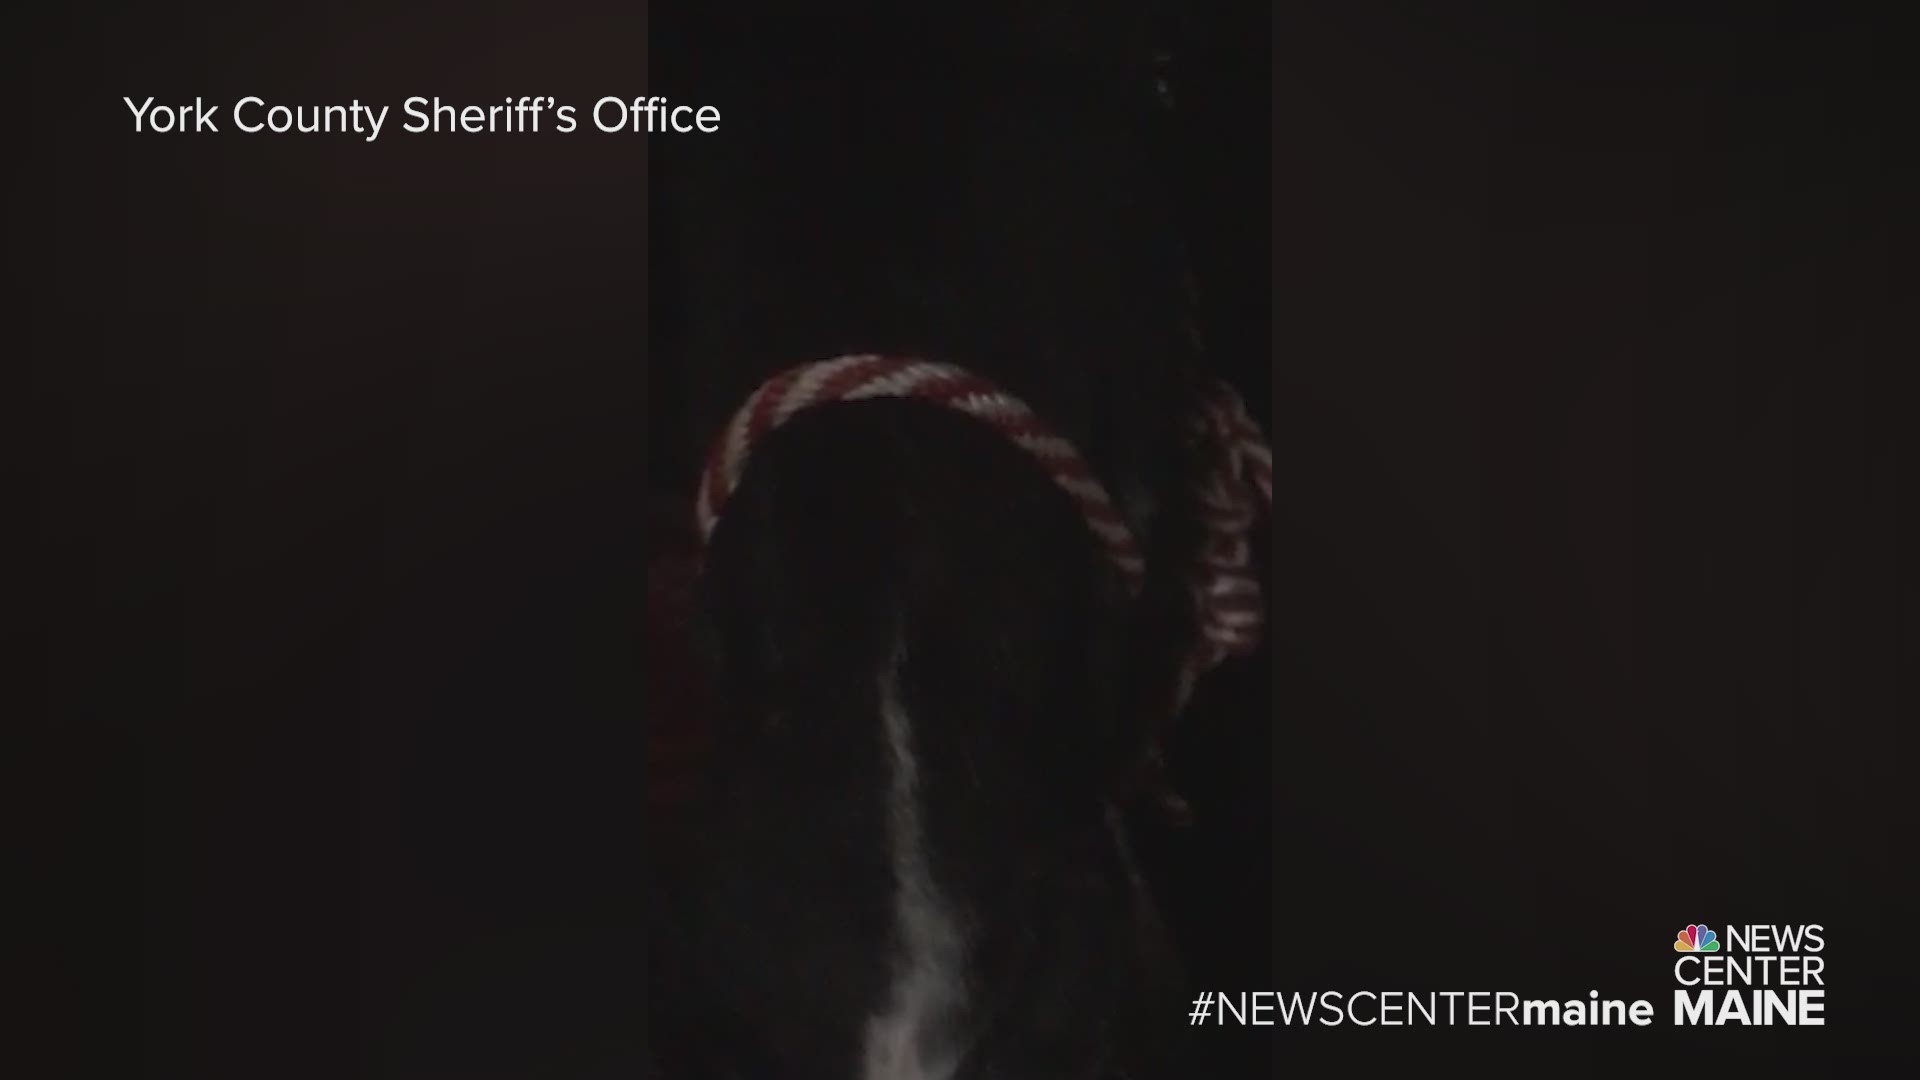 The York County Sheriff's Office helped rescue a horse on the loose in Cornish early Tuesday morning.